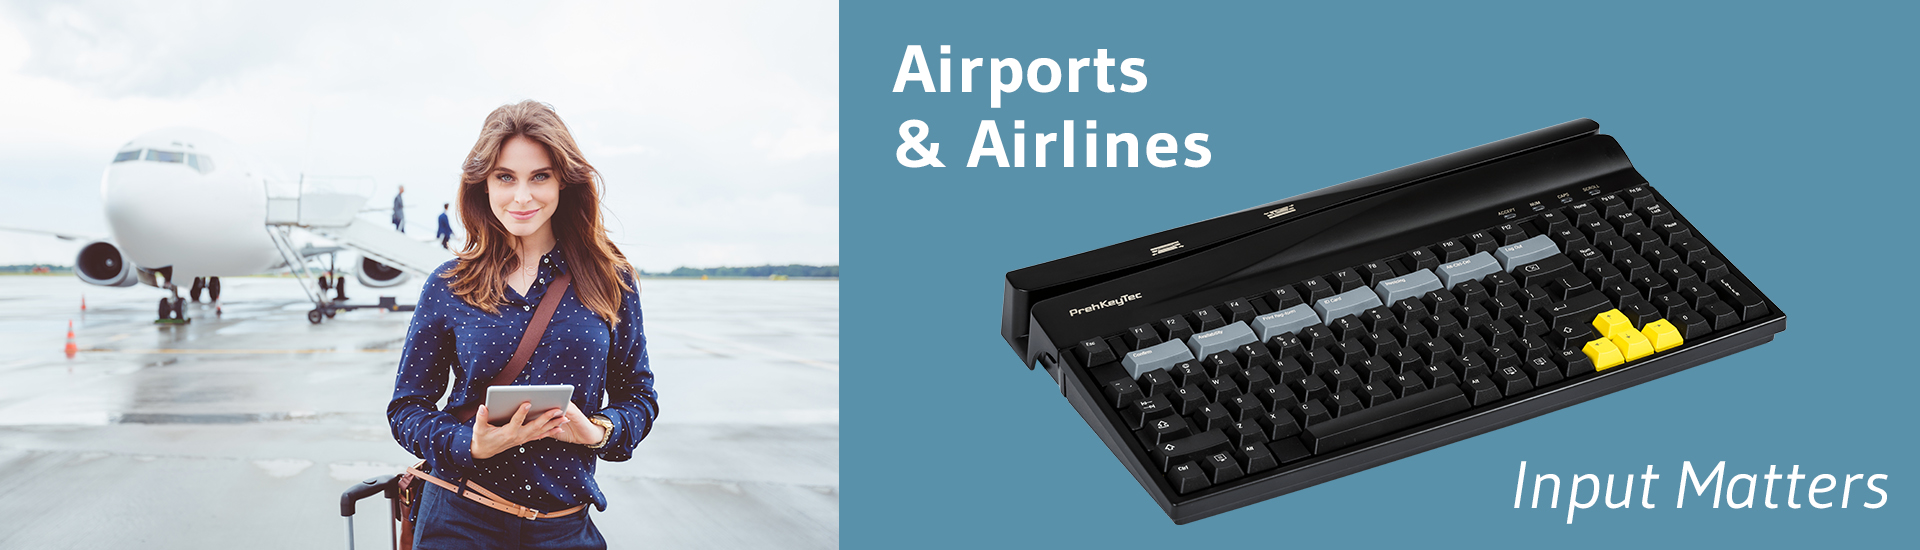 Data Input Solutions for Airports and Airlines